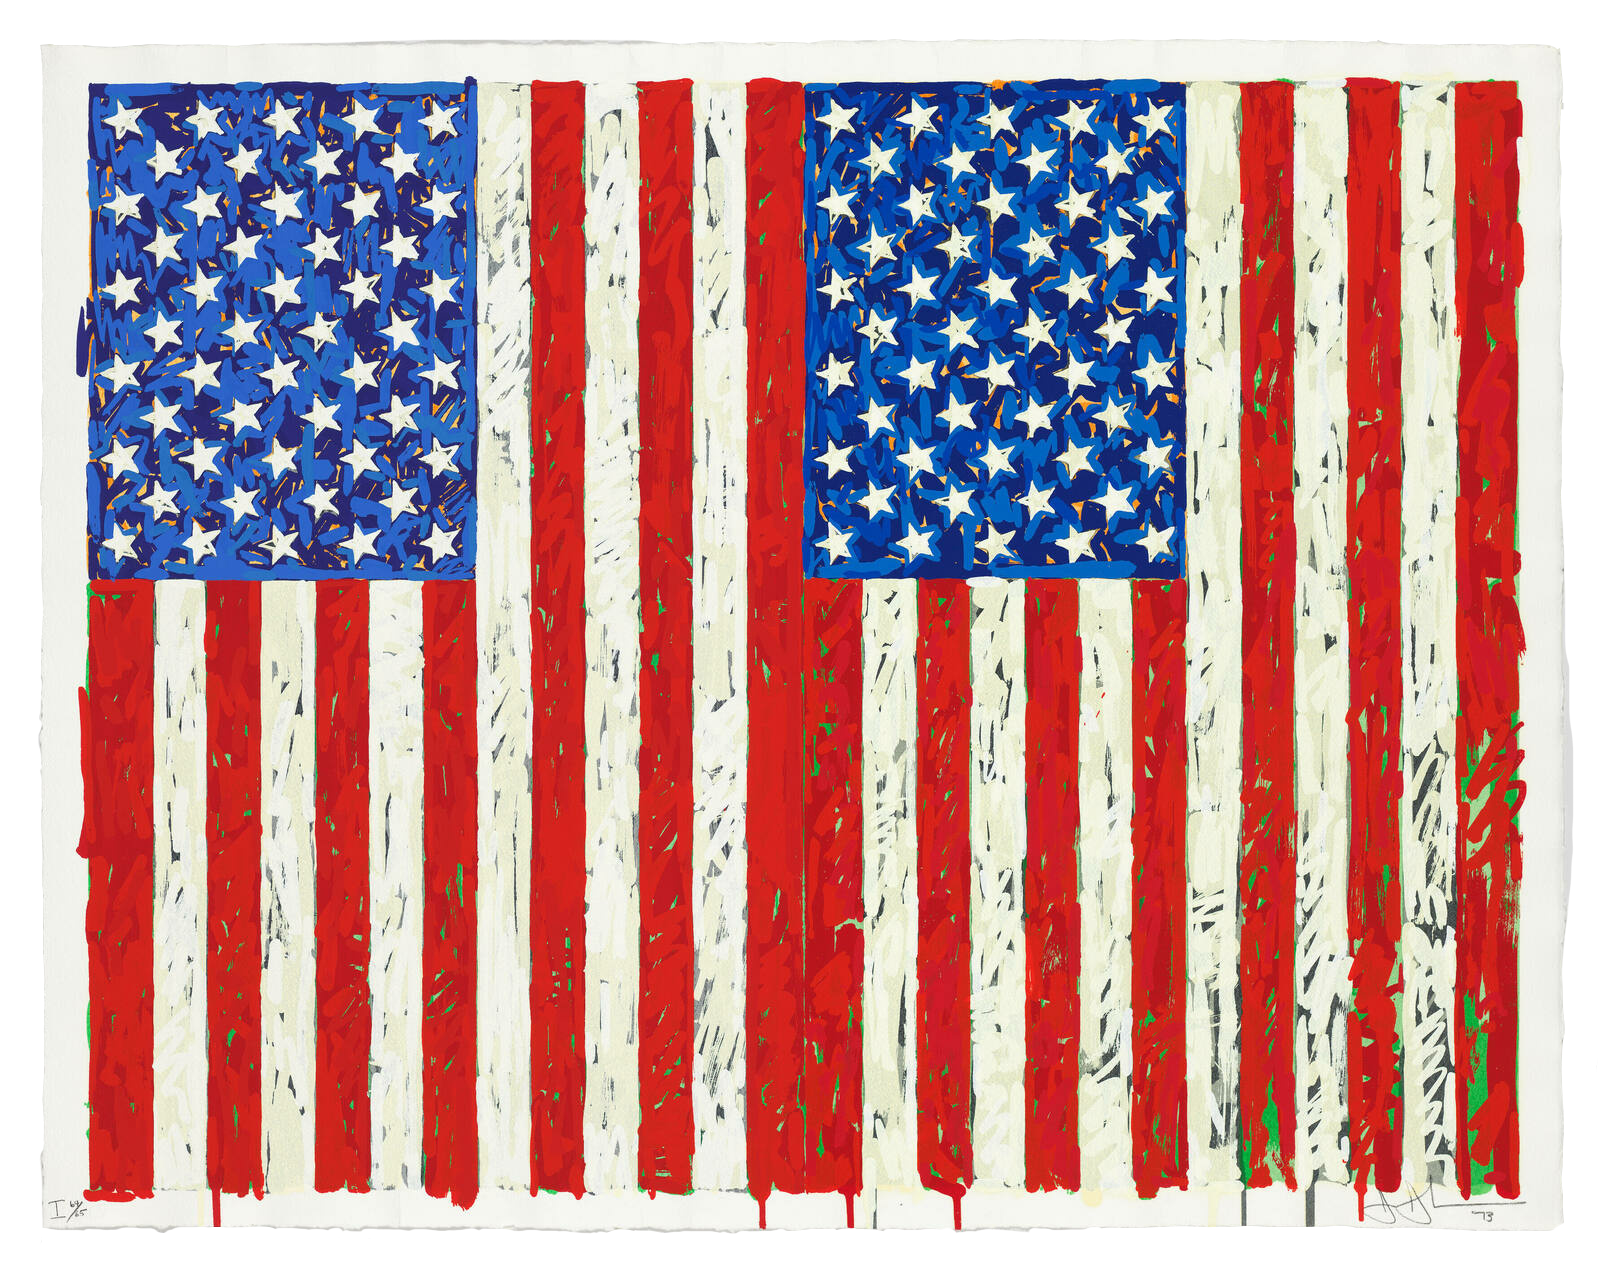 Jasper John's 1973 "Flag I" (screen print on paper from the collection Walker Art Center, 1988 gift of Judy and Kenneth Dayton)